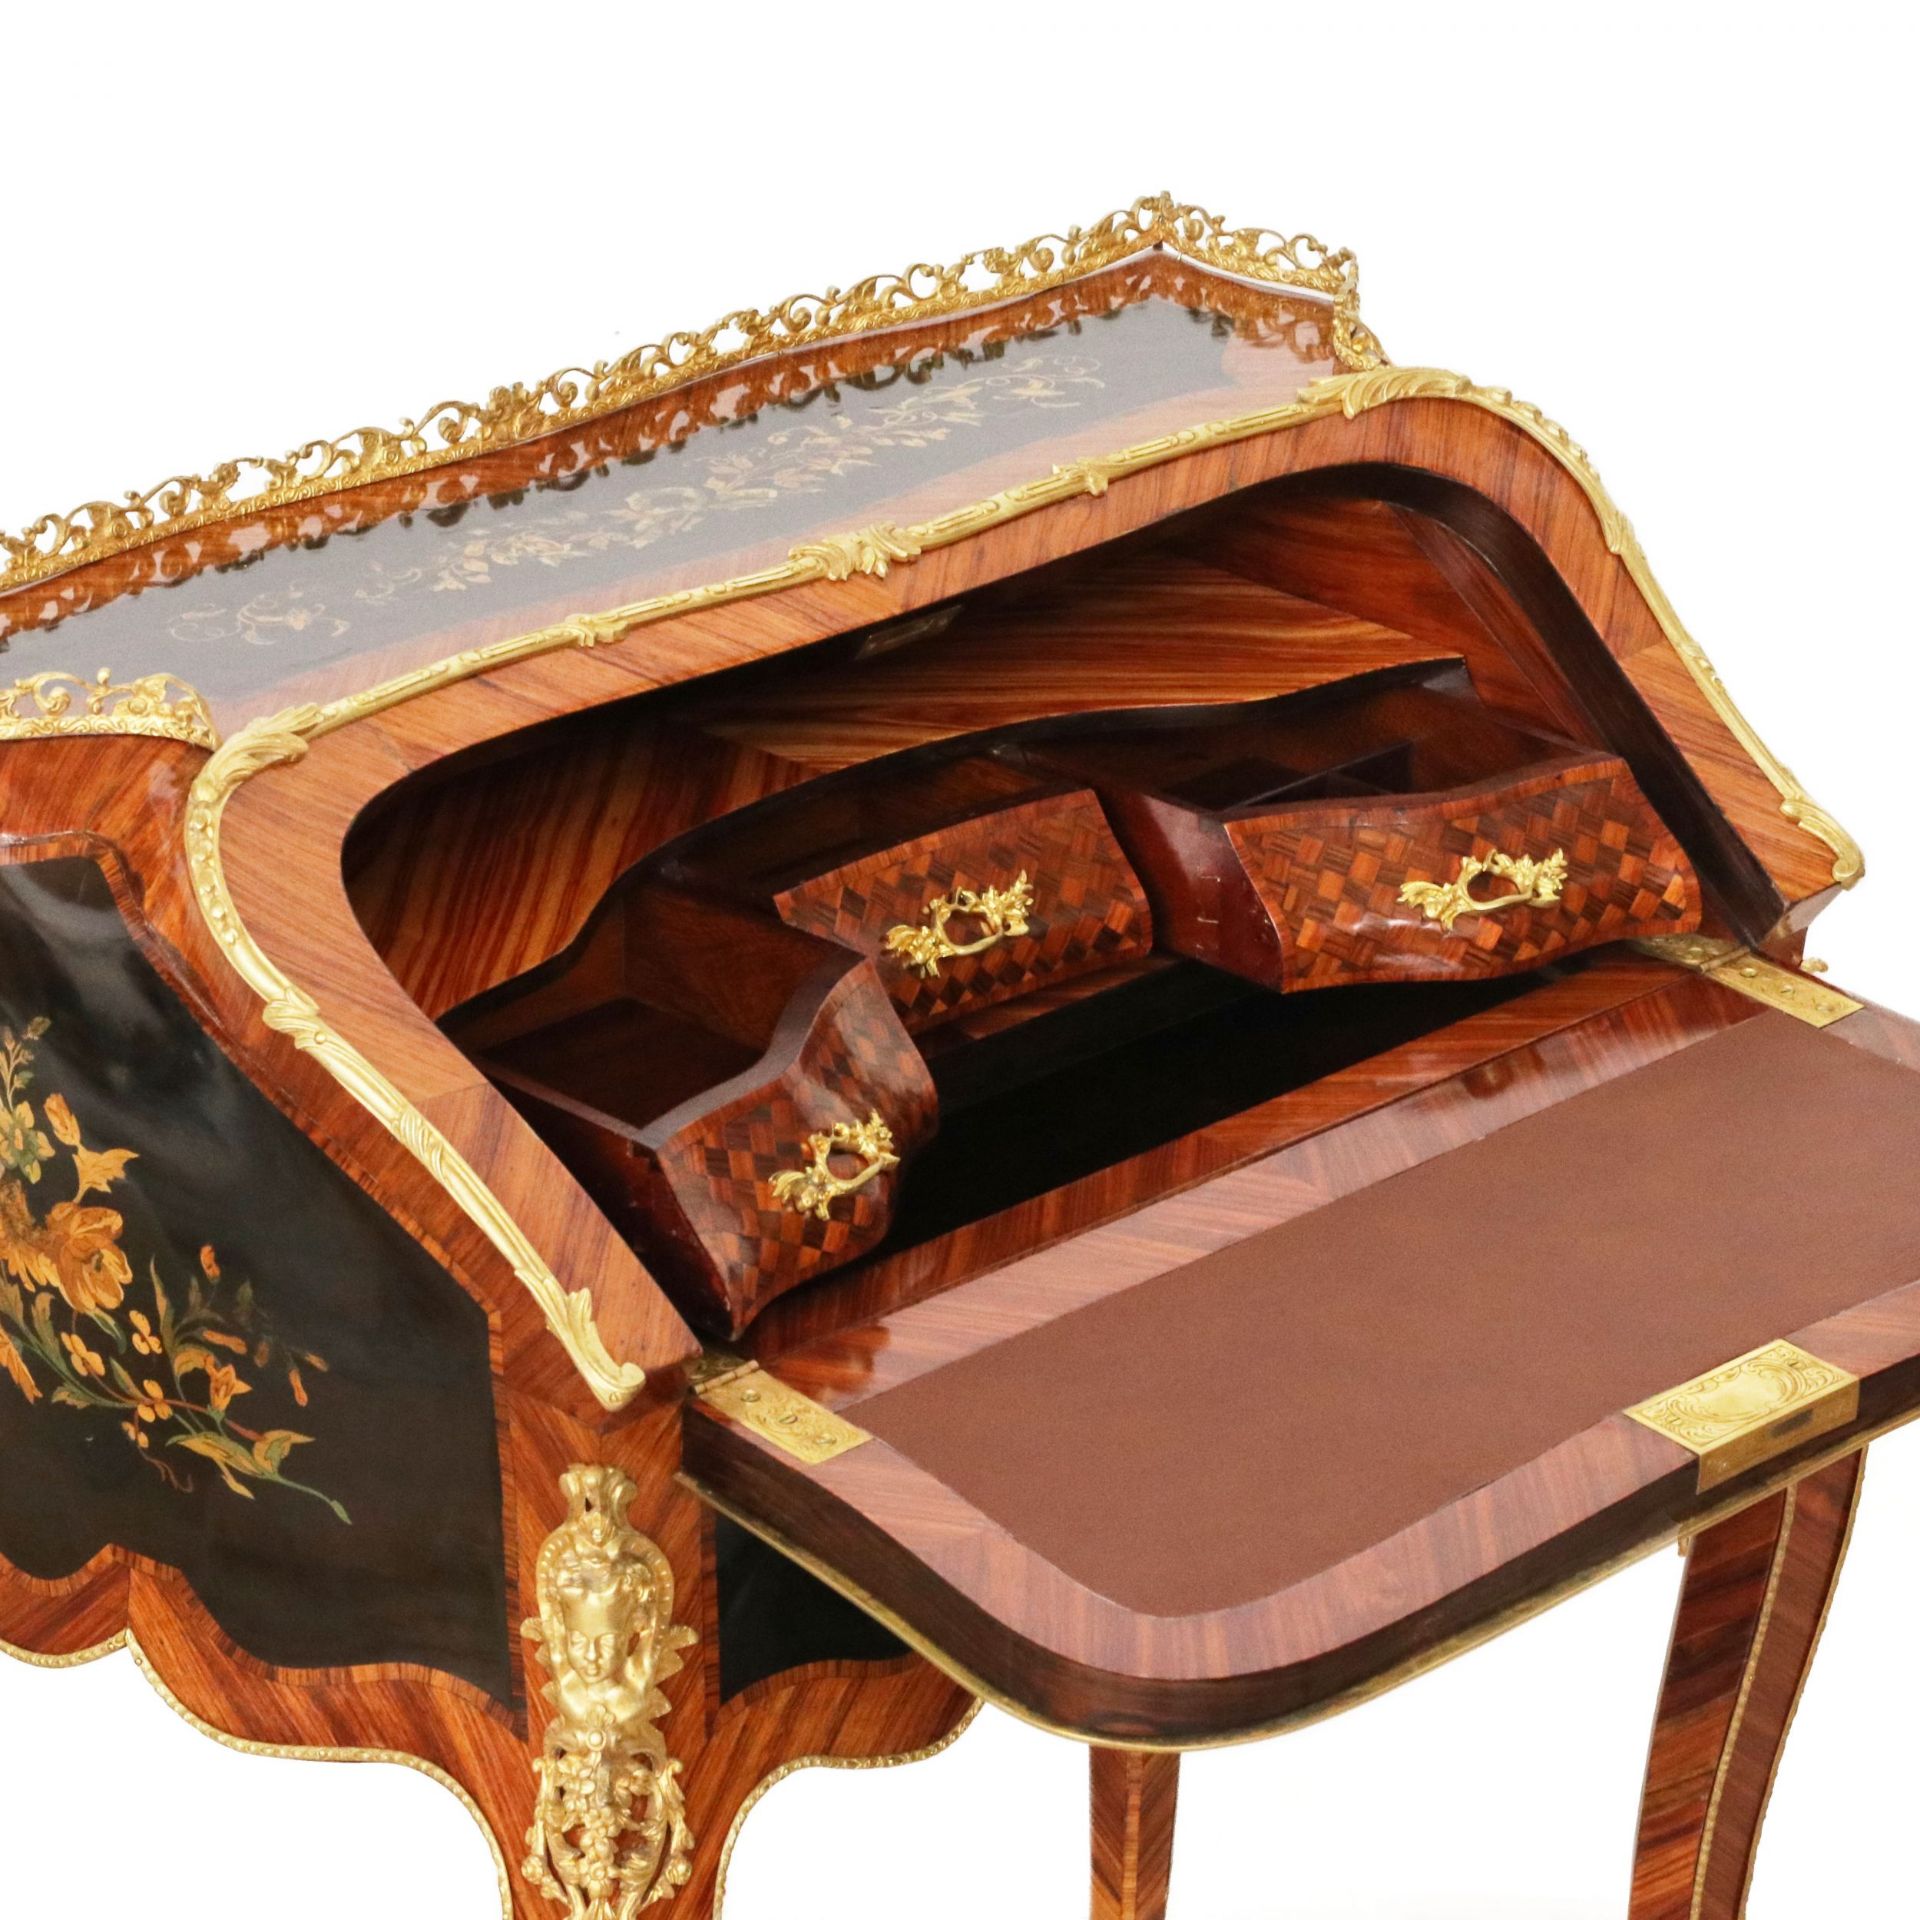 Coquettish ladies` bureau in wood and gilded bronze, Louis XV style. - Image 9 of 11